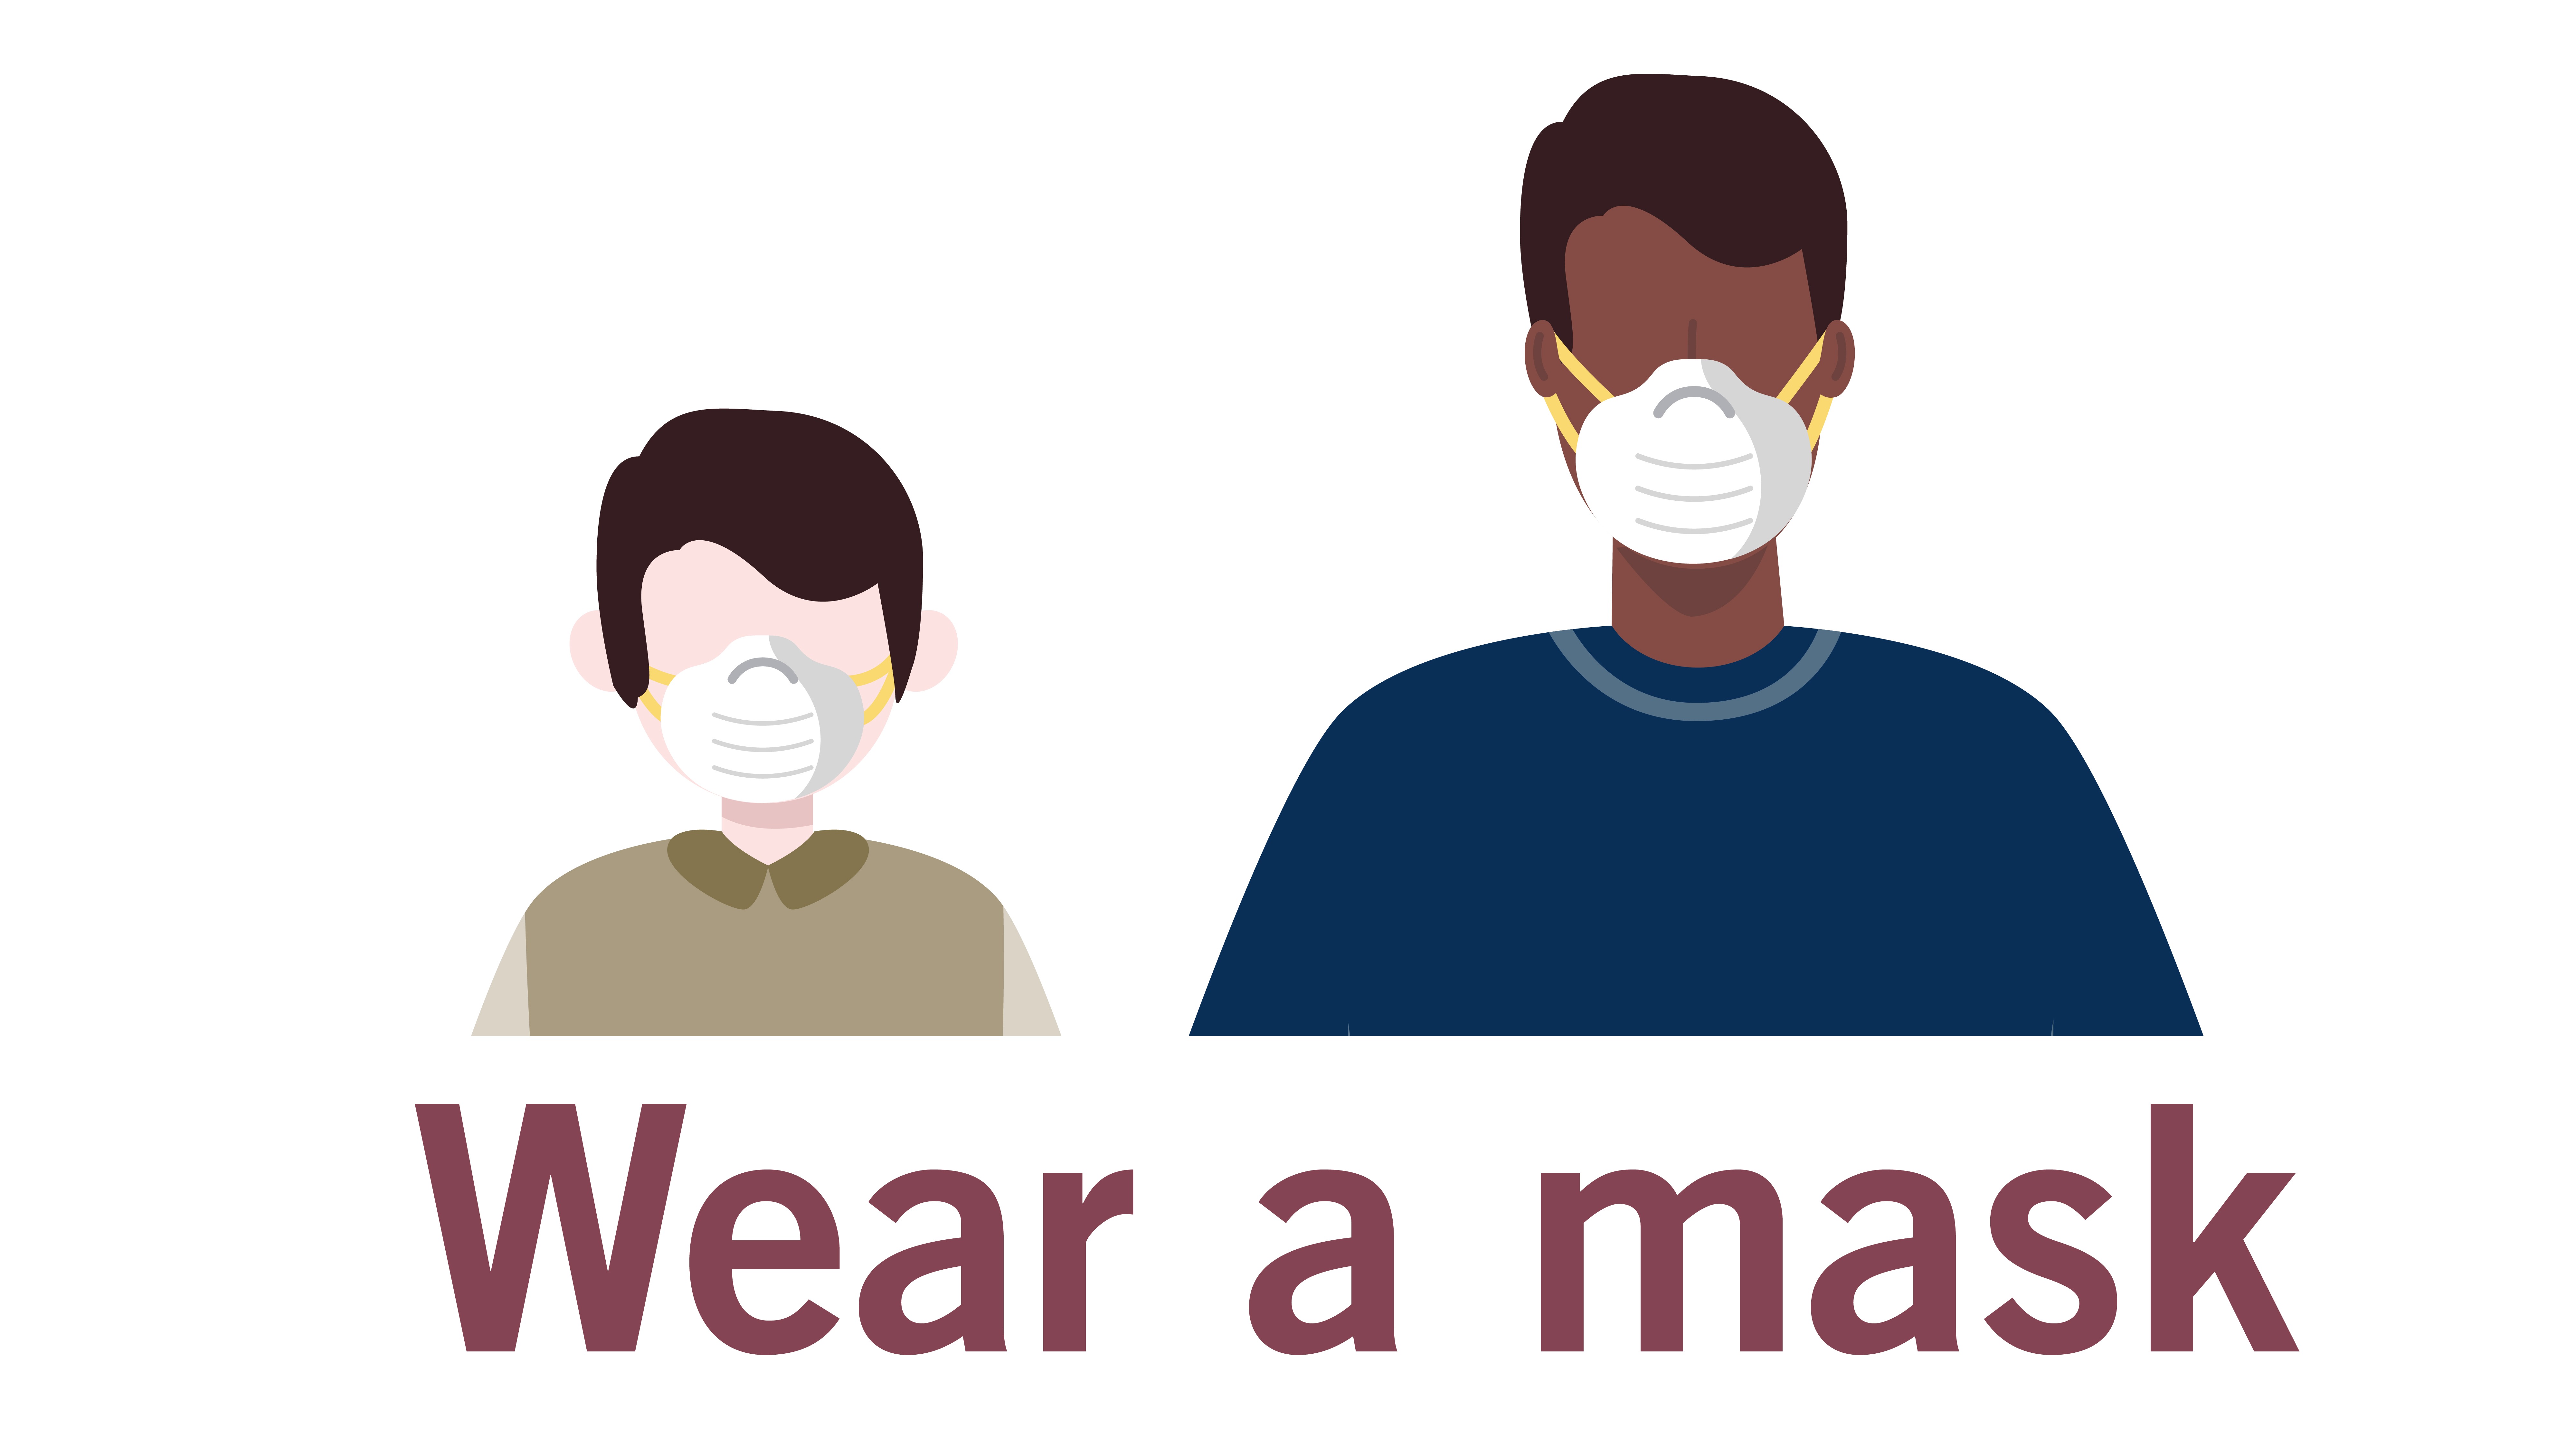 Wear a mask graphic